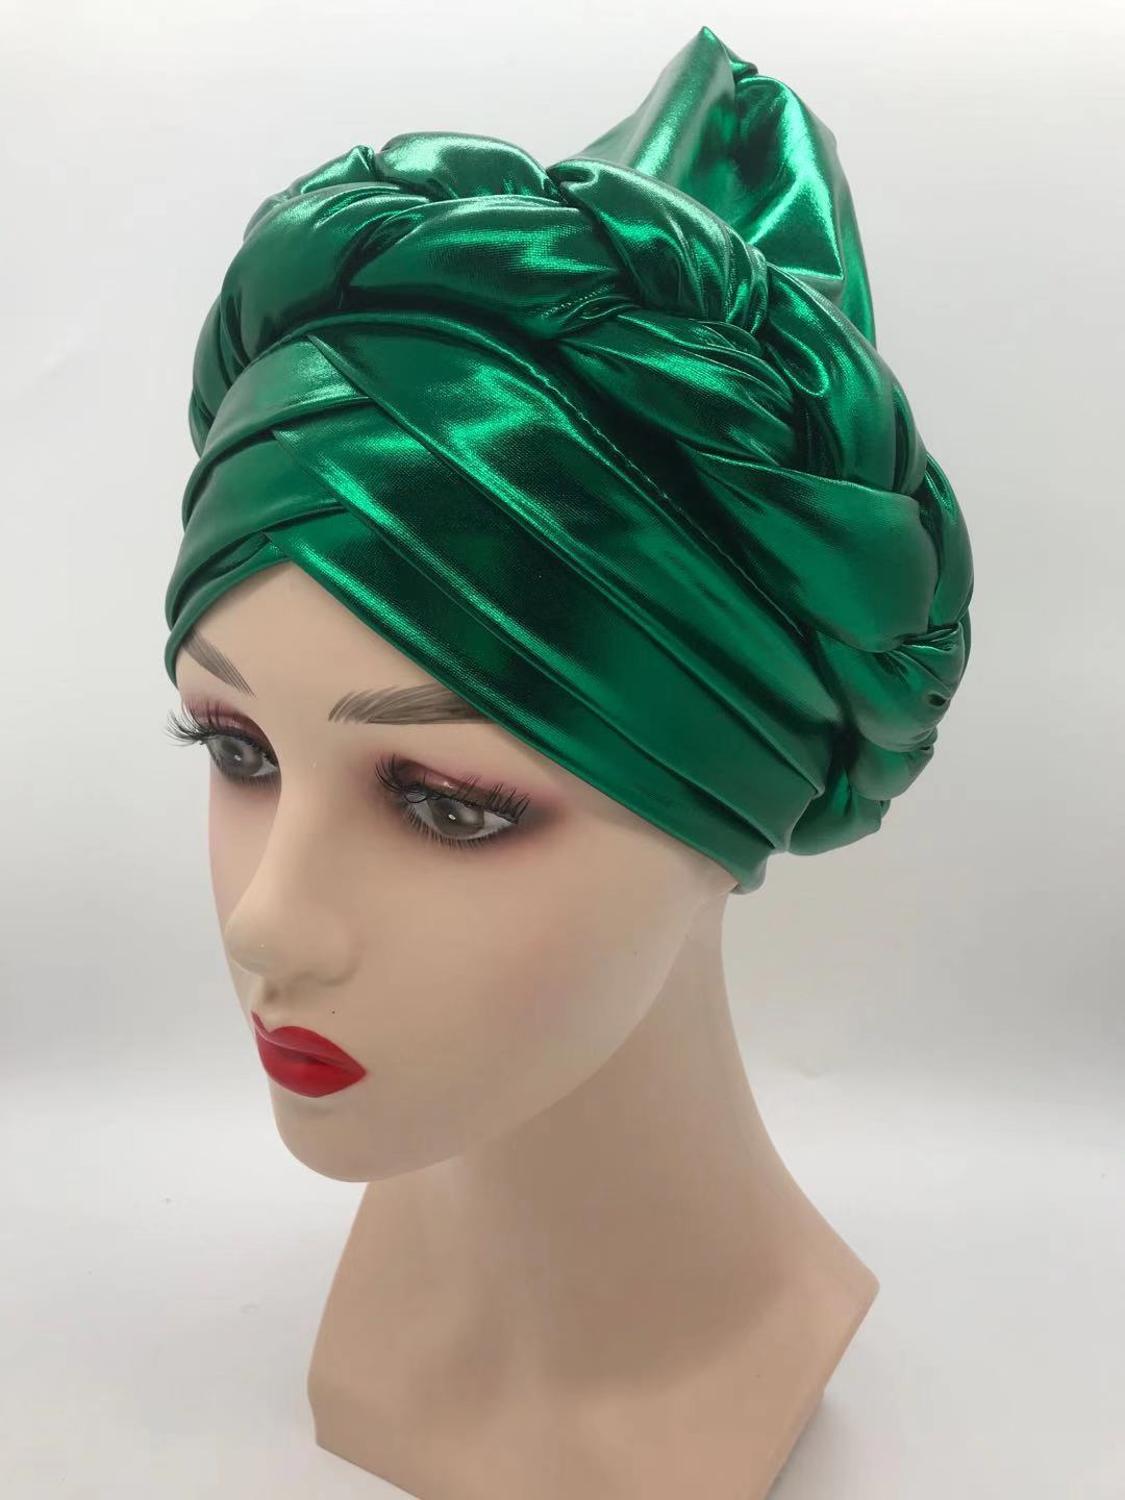 Forehead Braids Turban Cap Shimmering African Headtie, Head Wraps, Muslim Headscarf, and Bonnet Ready Hijab Hat - Flexi Africa - Flexi Africa offers Free Delivery Worldwide - Vibrant African traditional clothing showcasing bold prints and intricate designs